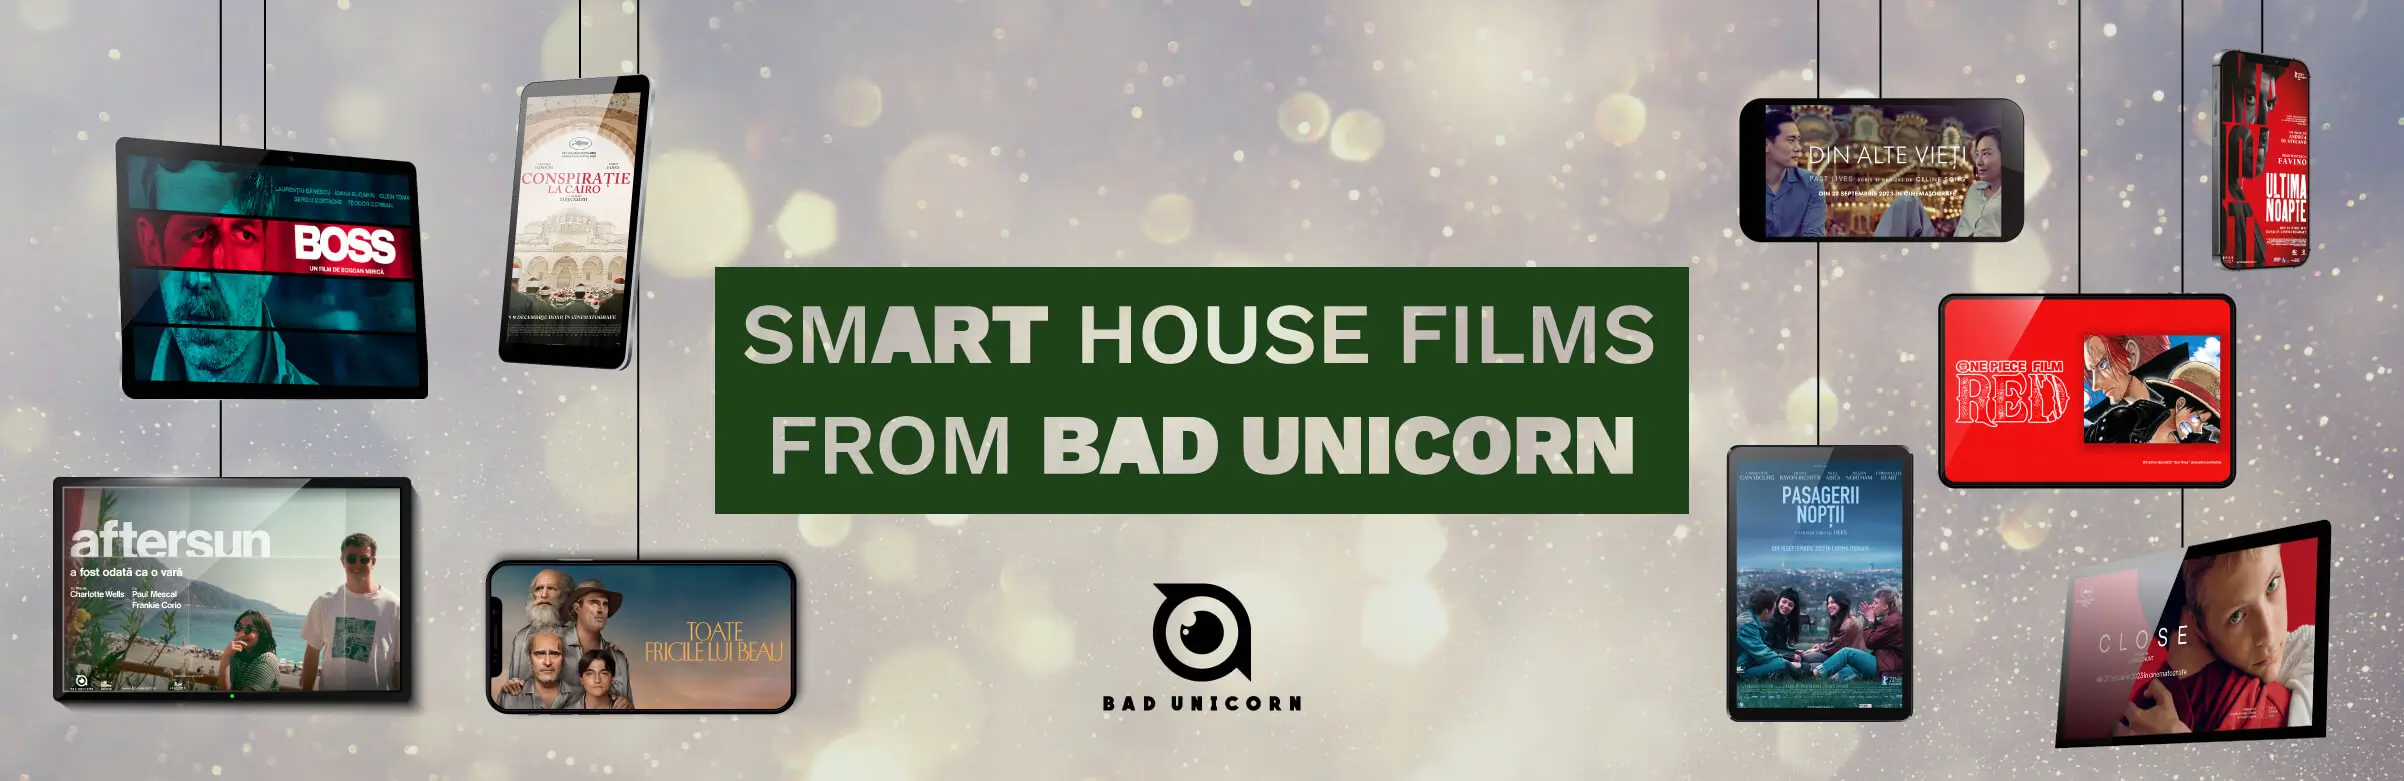 smART HOUSE films from Bad Unicorn